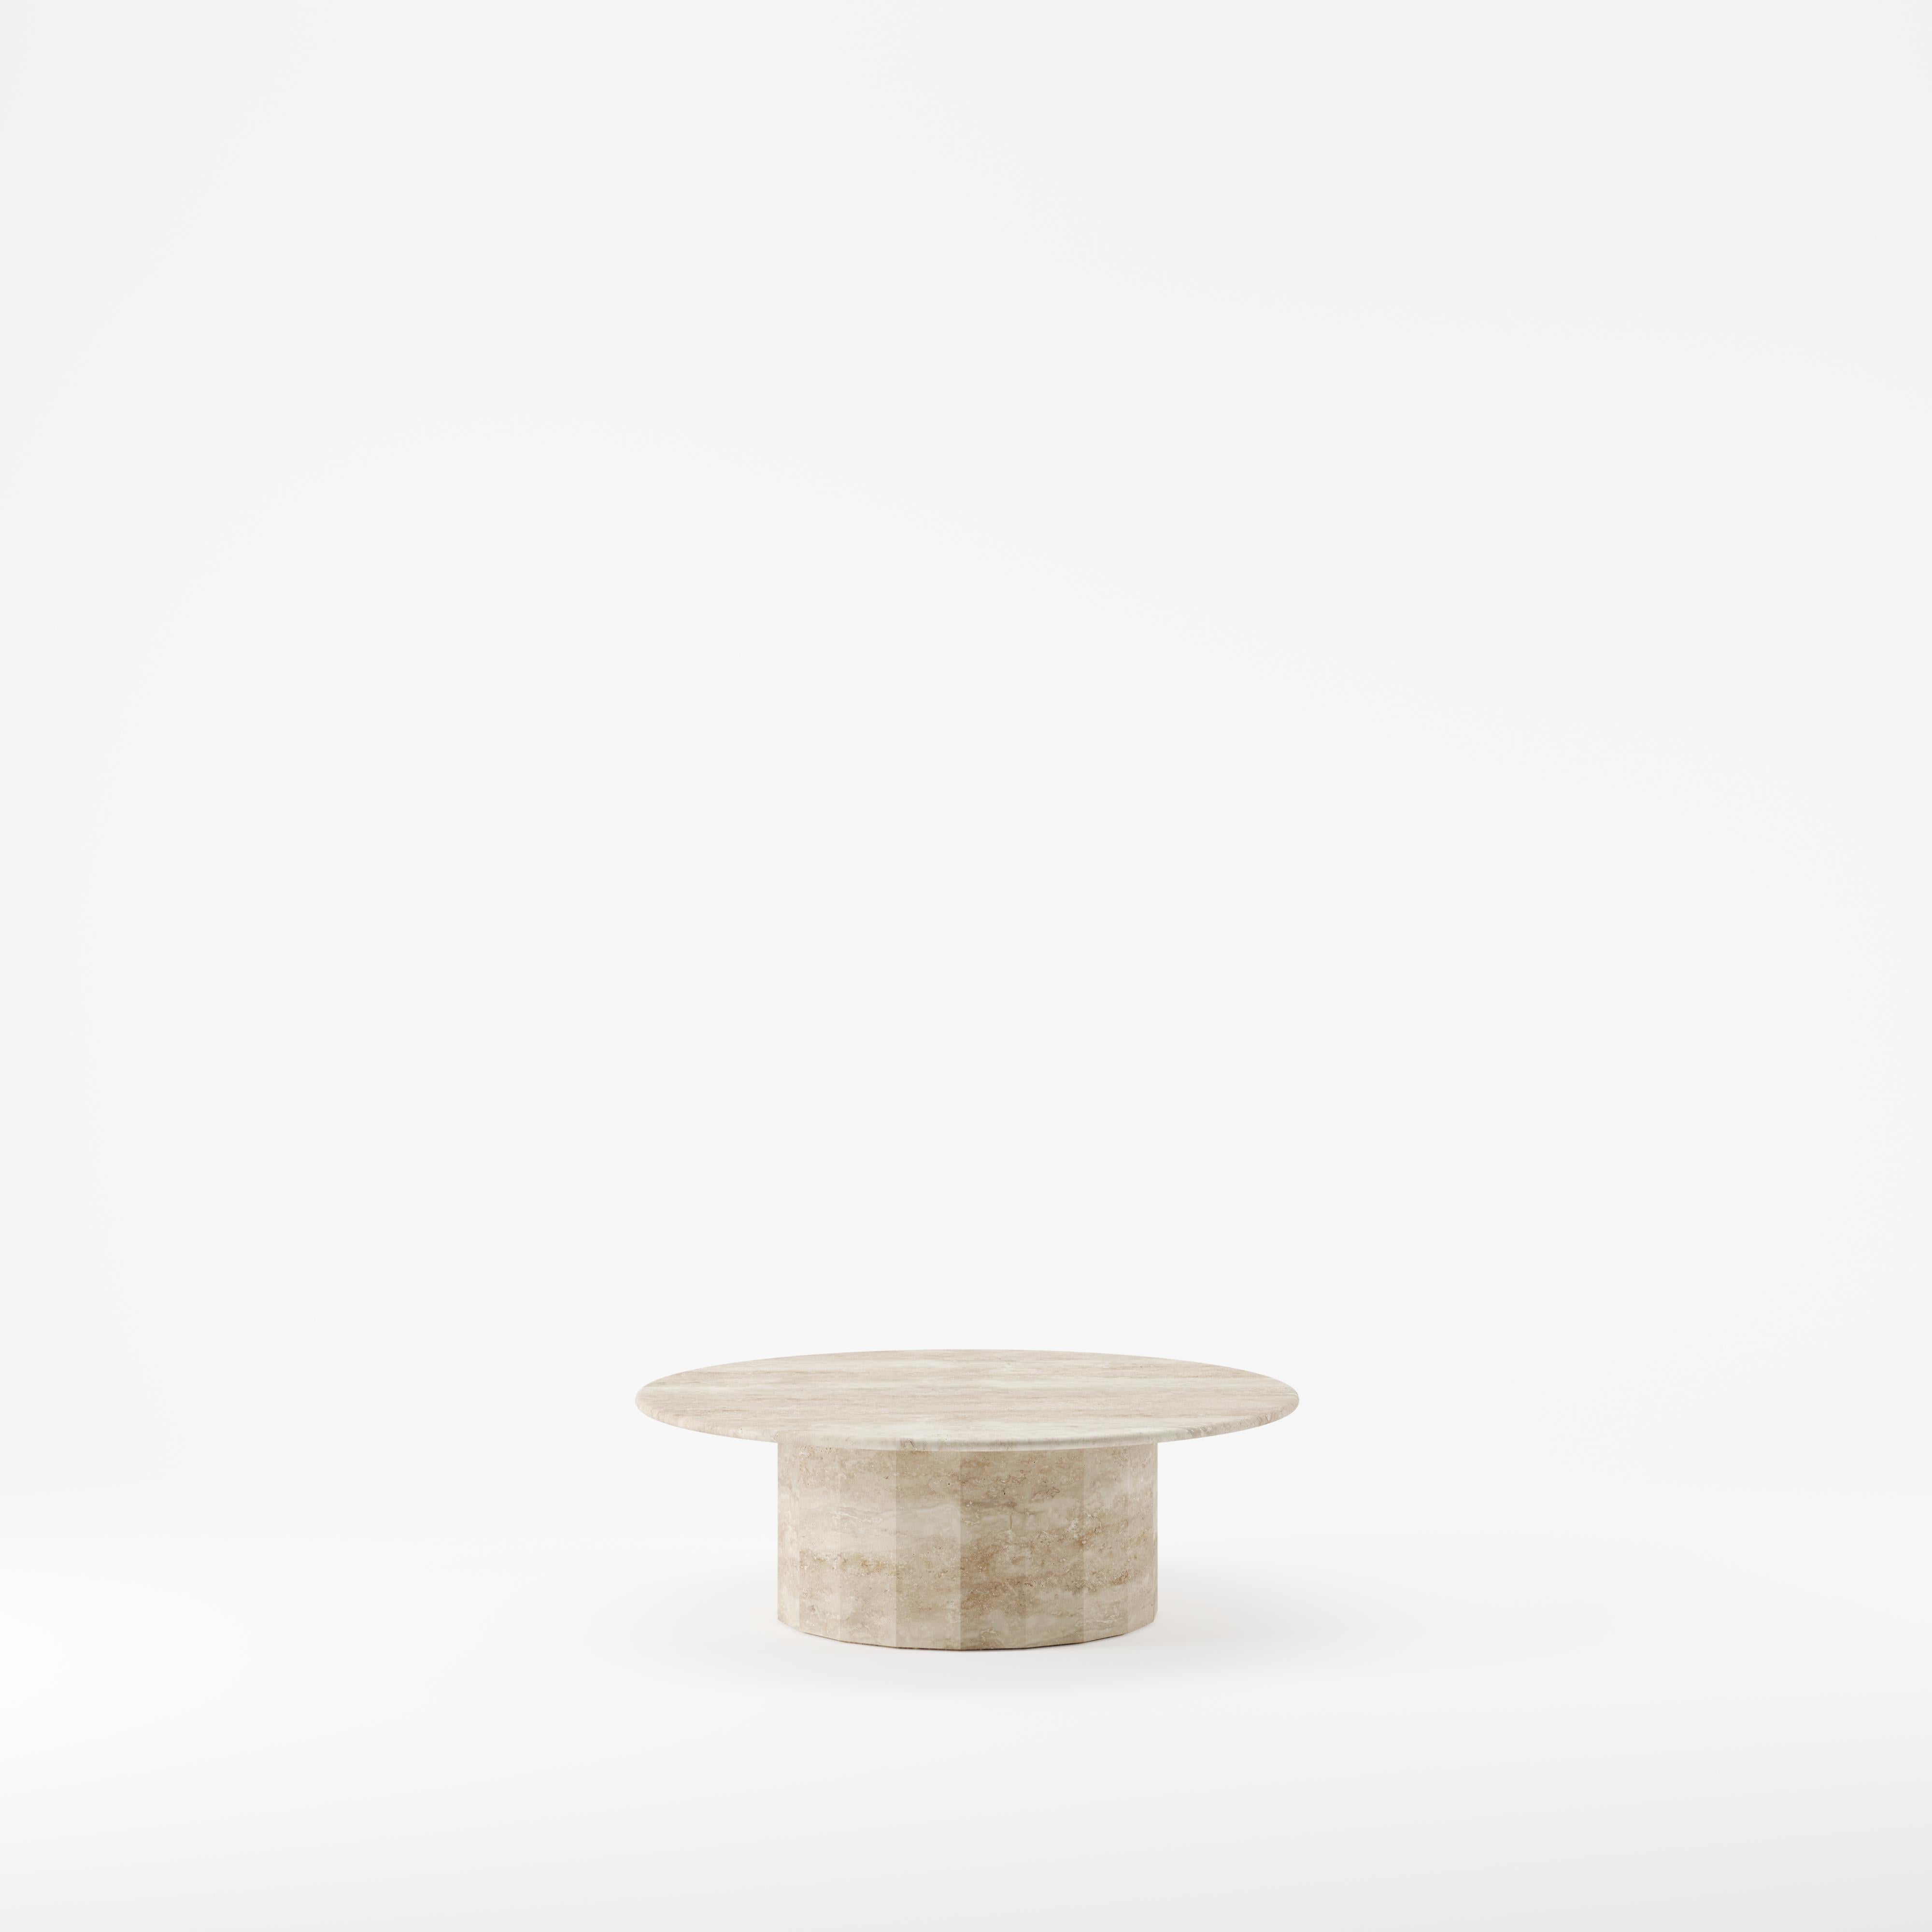 South African Ashby Round Coffee Table Handcrafted in Honed Travertine 110cm/43